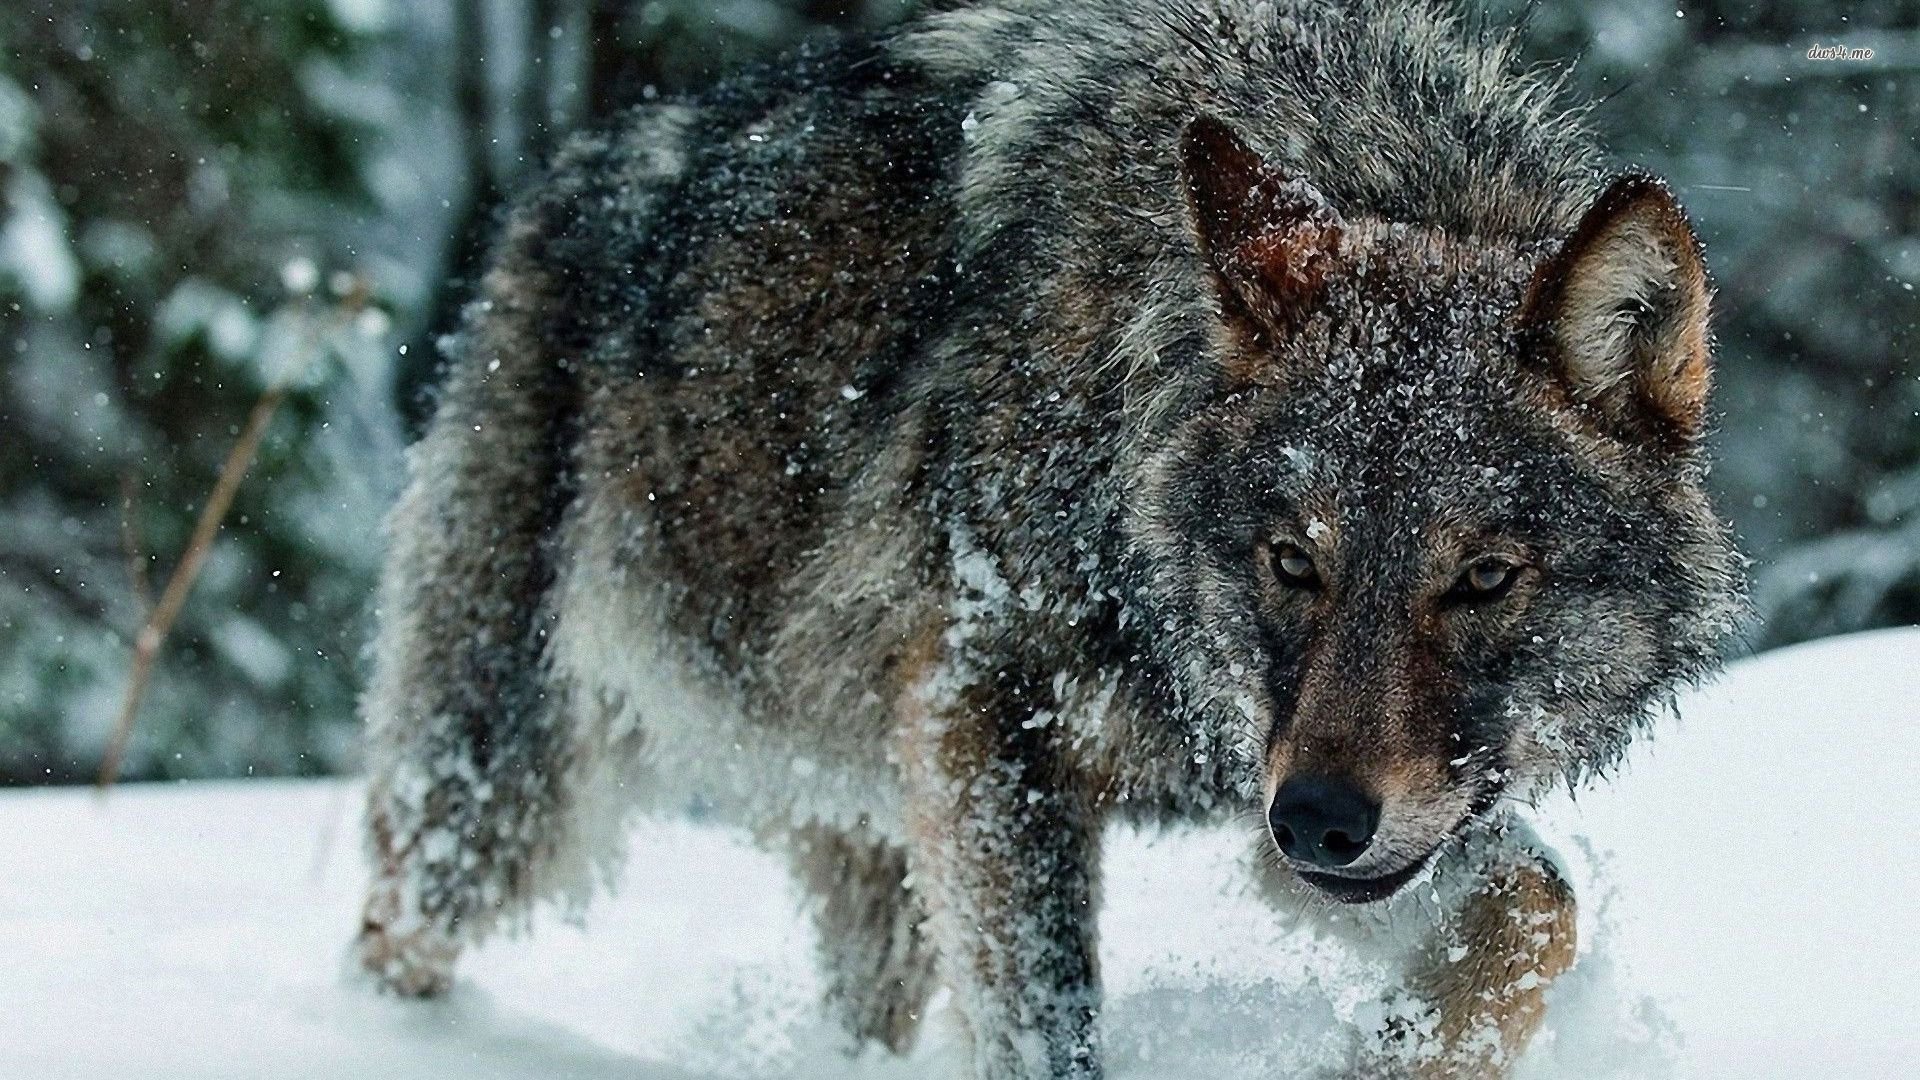 Wolf in the snow wallpaper   Animal wallpapers   23881 1920x1080